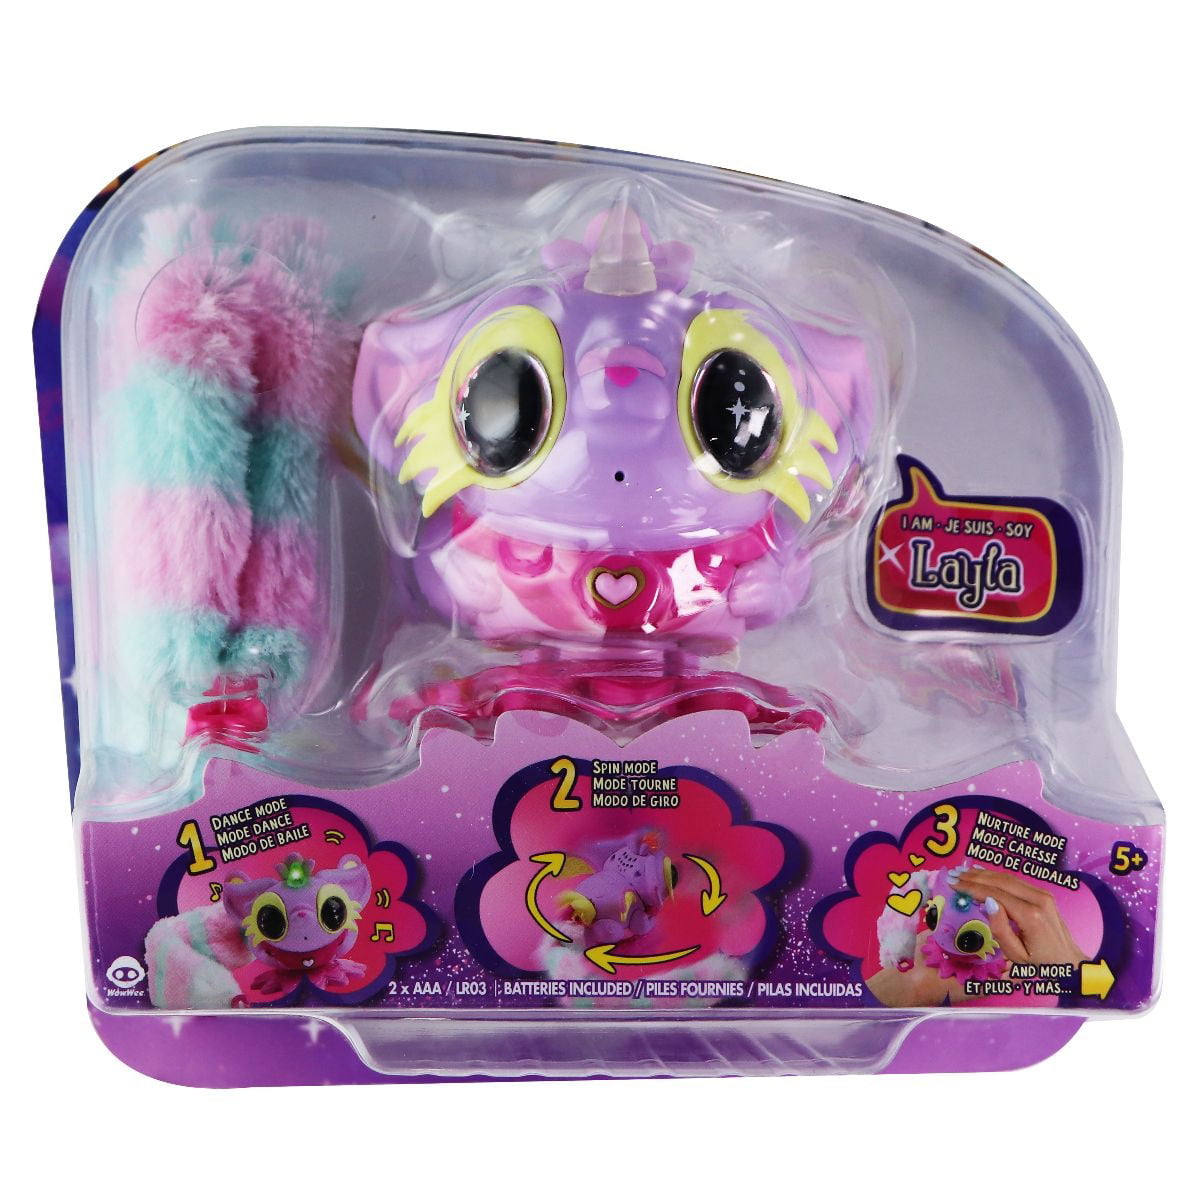 WowWee Pixie Belles Layla Purple Interactive Enchanted Animal Toy for sale online 